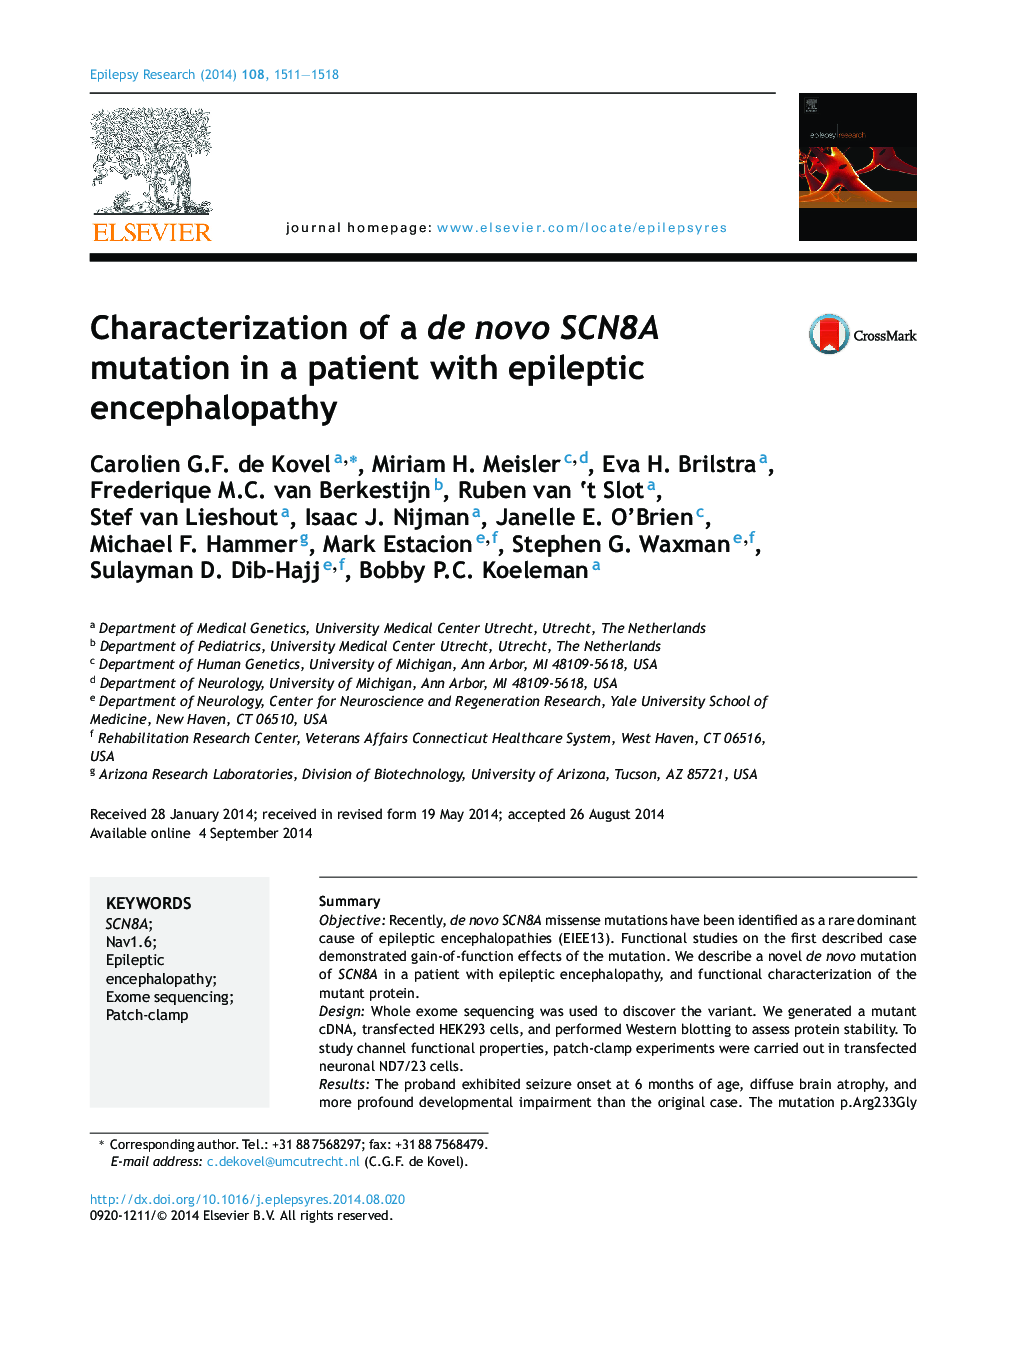 Characterization of a de novo SCN8A mutation in a patient with epileptic encephalopathy